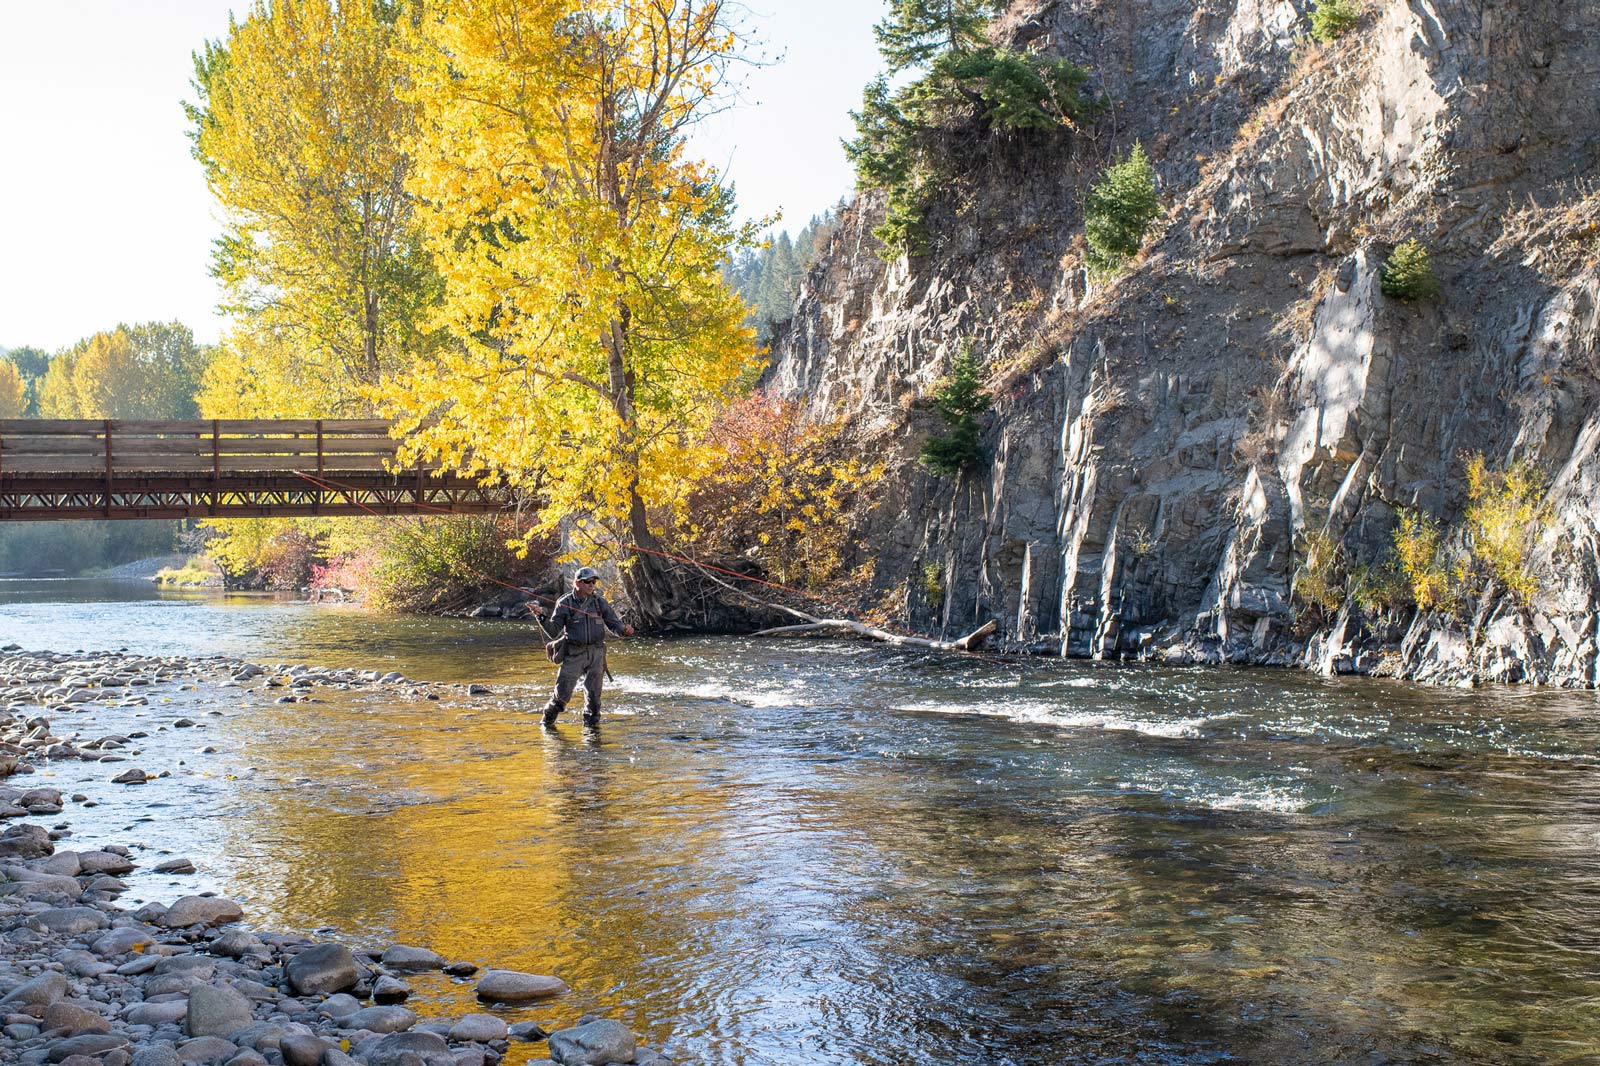 Angler fishing in the fall in the middle of the river with a bridge in the background